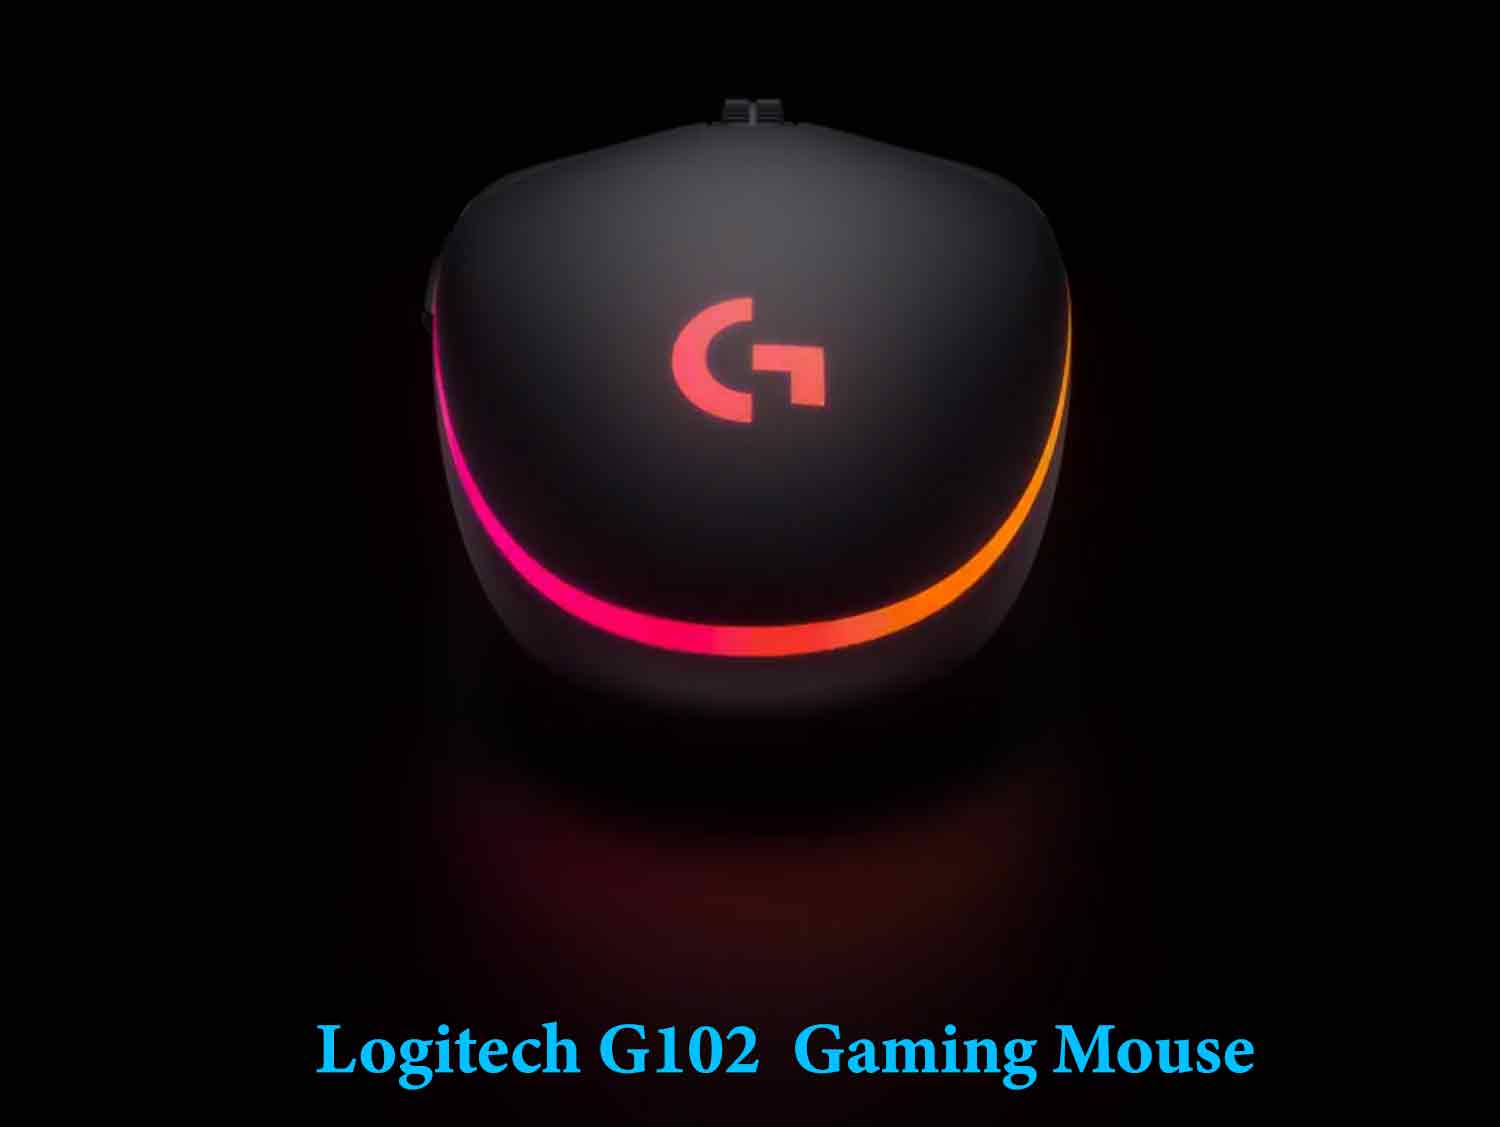 Logitech G102 LIGHTSYNC RGB gaming mouse illuminated in vibrant colors